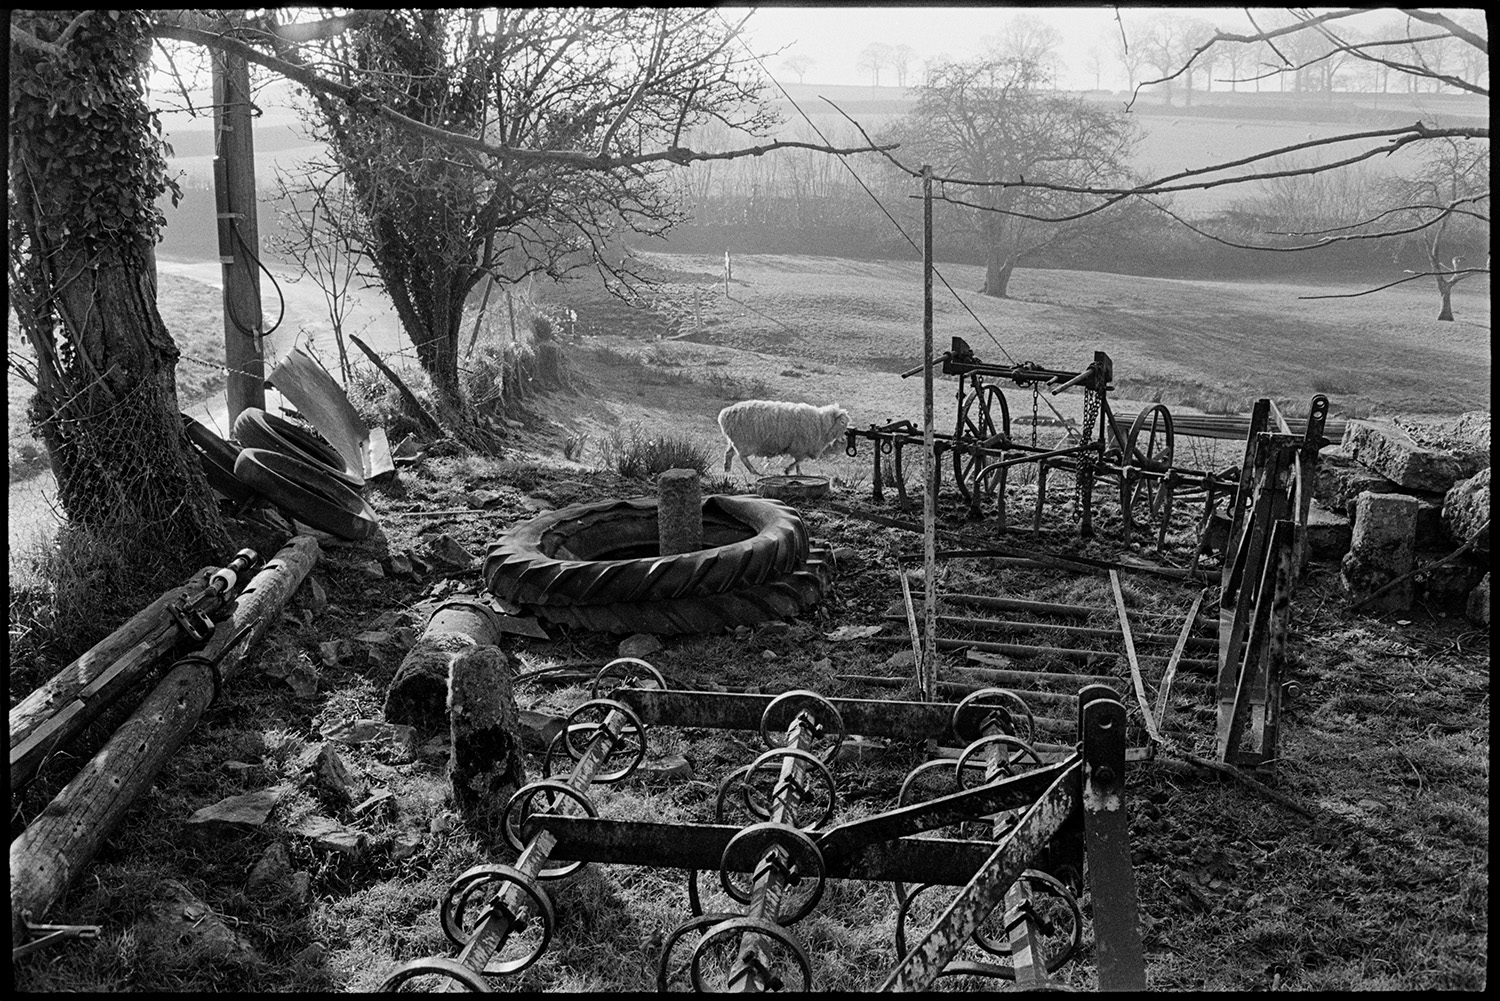 Farmyard, cattle, sheep, implements. 
[Old farm machinery, including a harrow and old tractor tyres in a field at Lower Langham, Dolton. A sheep is walking past the machinery.]